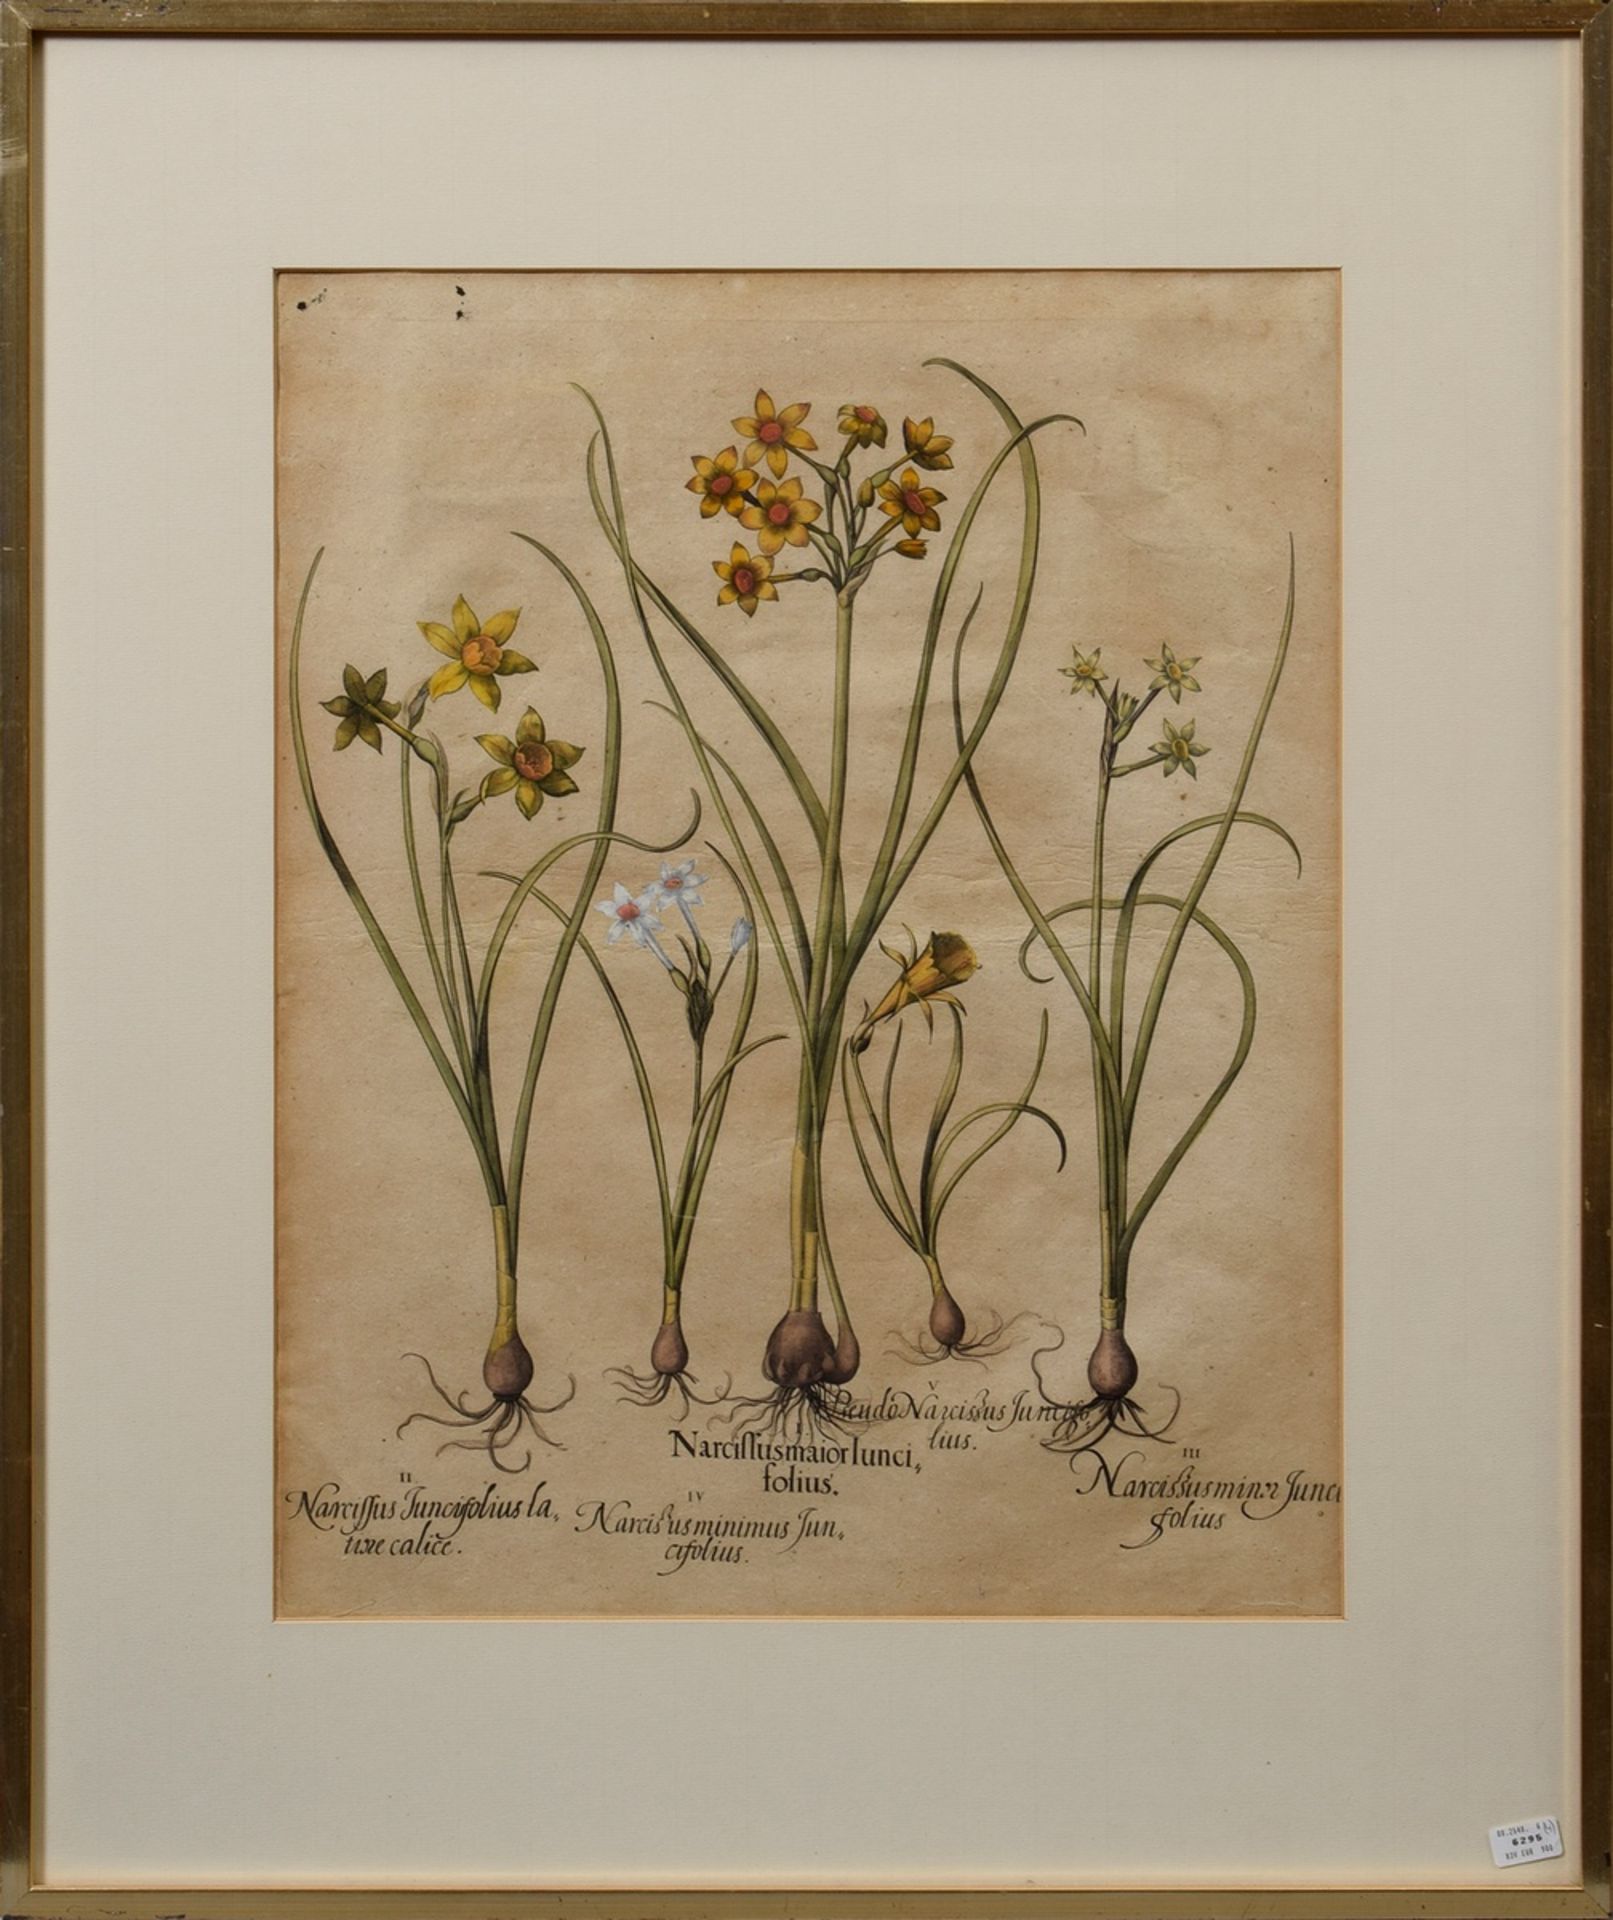 Besler, Basil (1561-1629) "Narcissus", coloured copper engraving, from "Hortus Eystettensis", 50x40 - Image 2 of 2